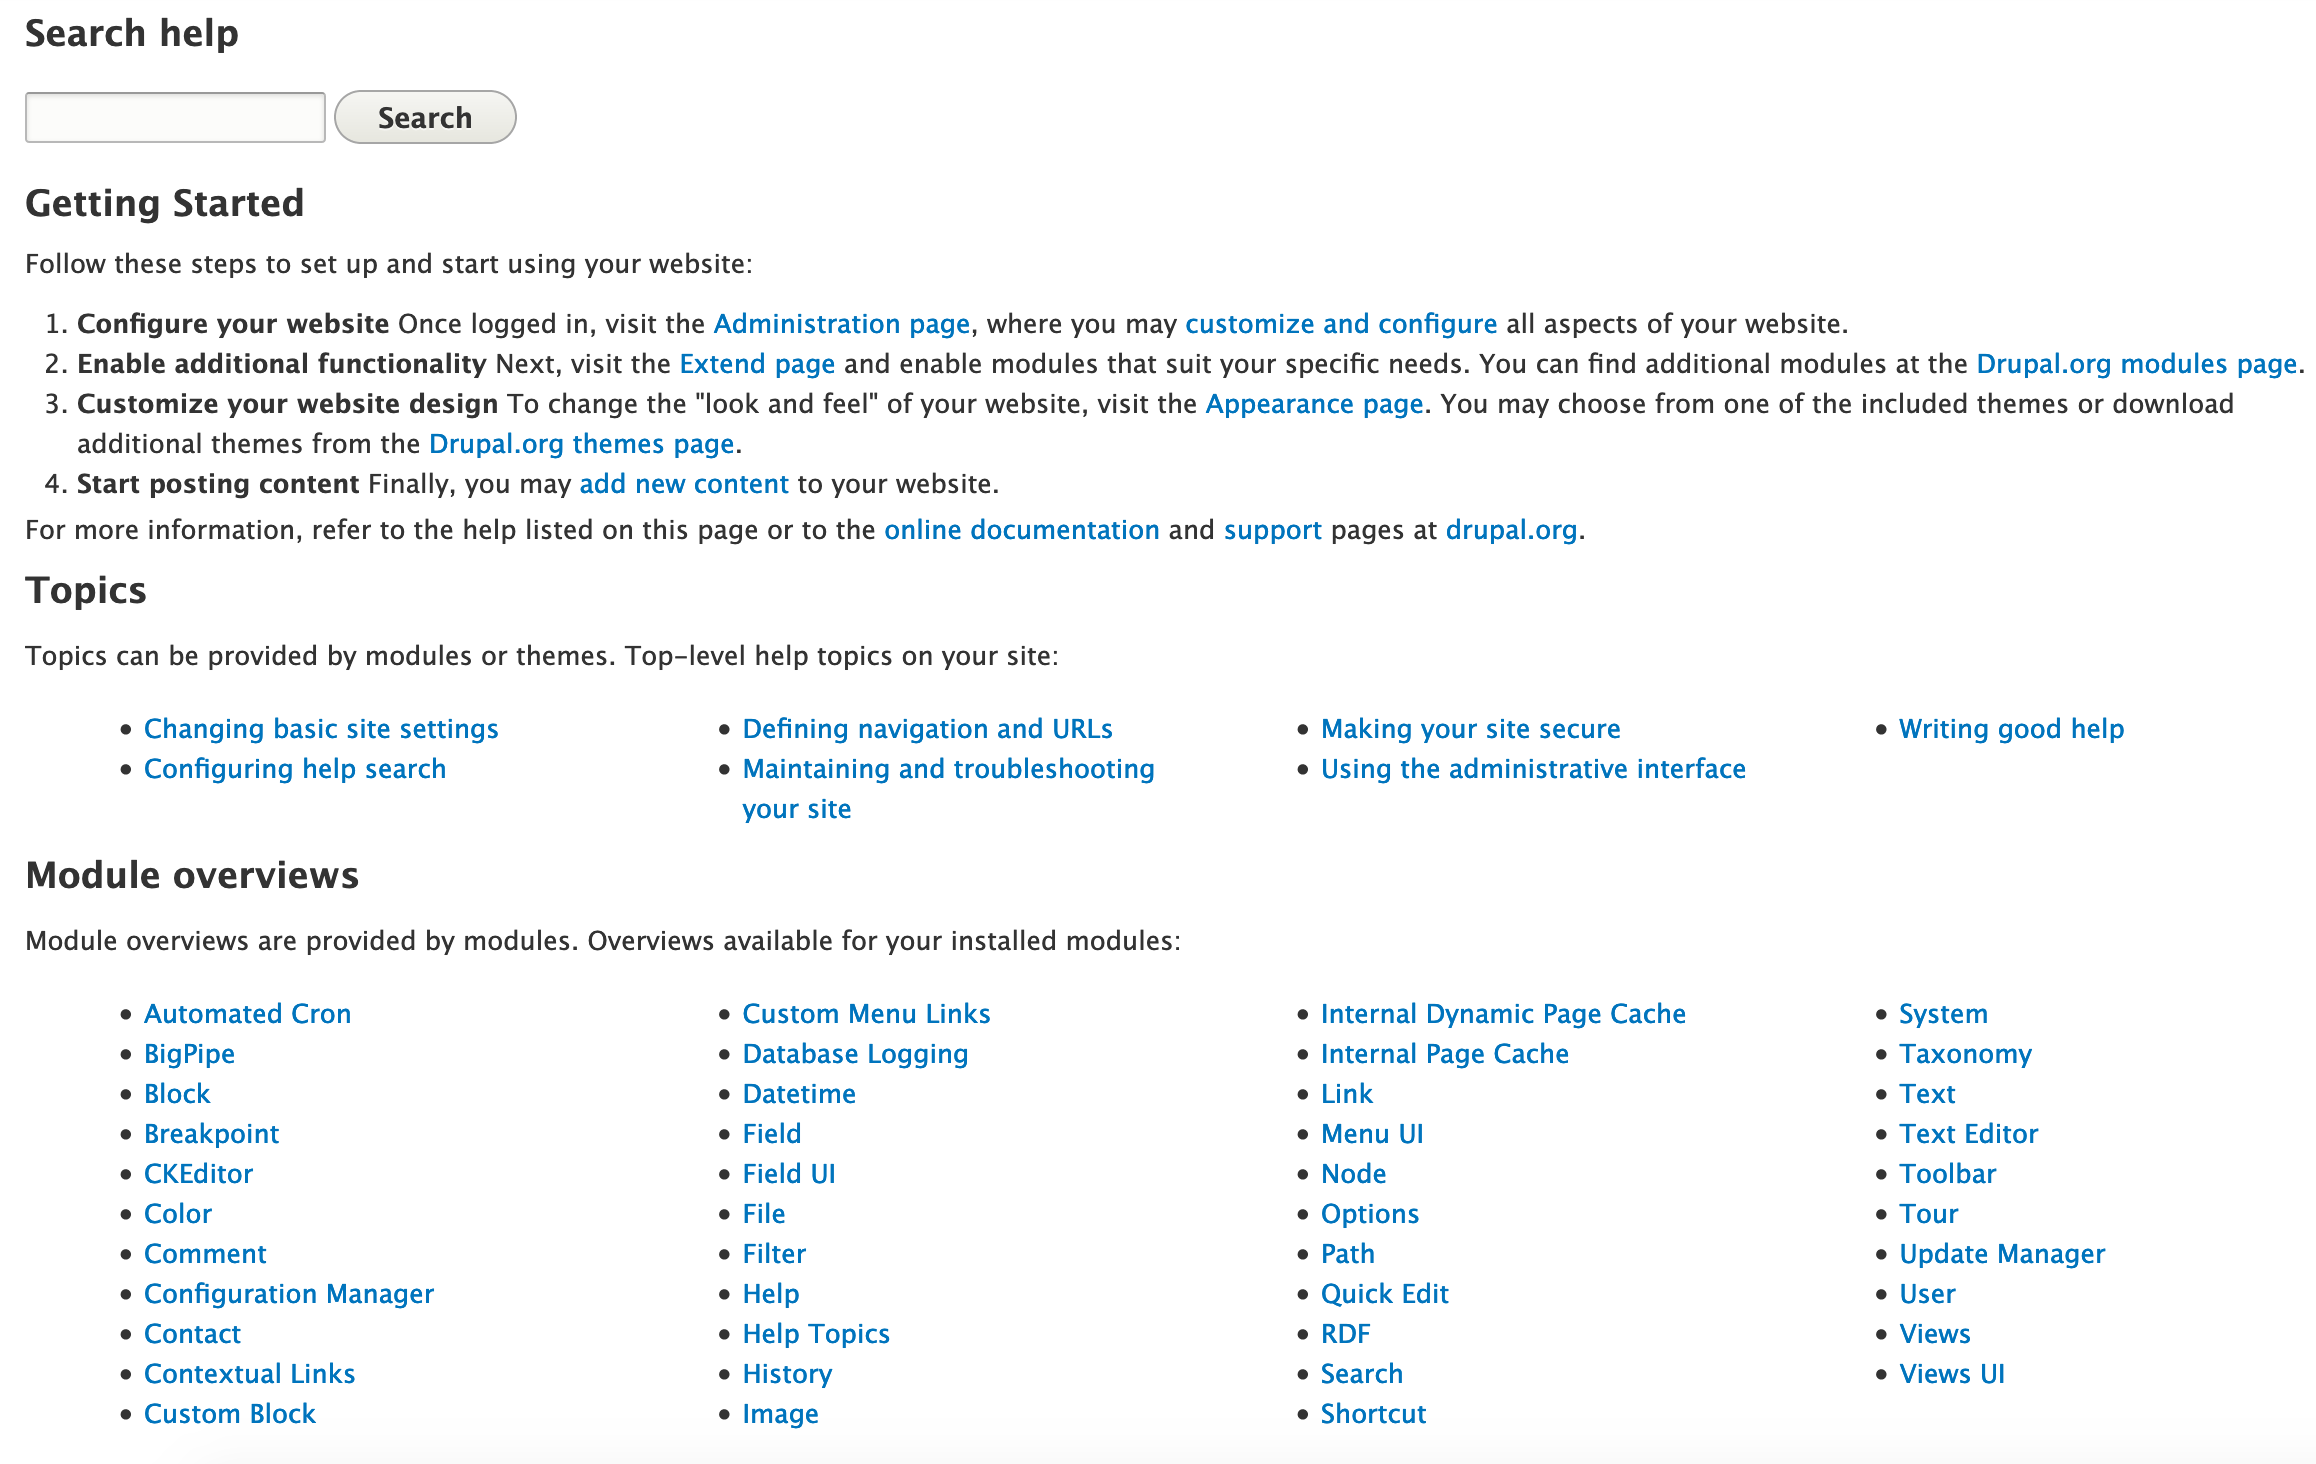 Help index now contains search box, heading for topics underneath tutorial.